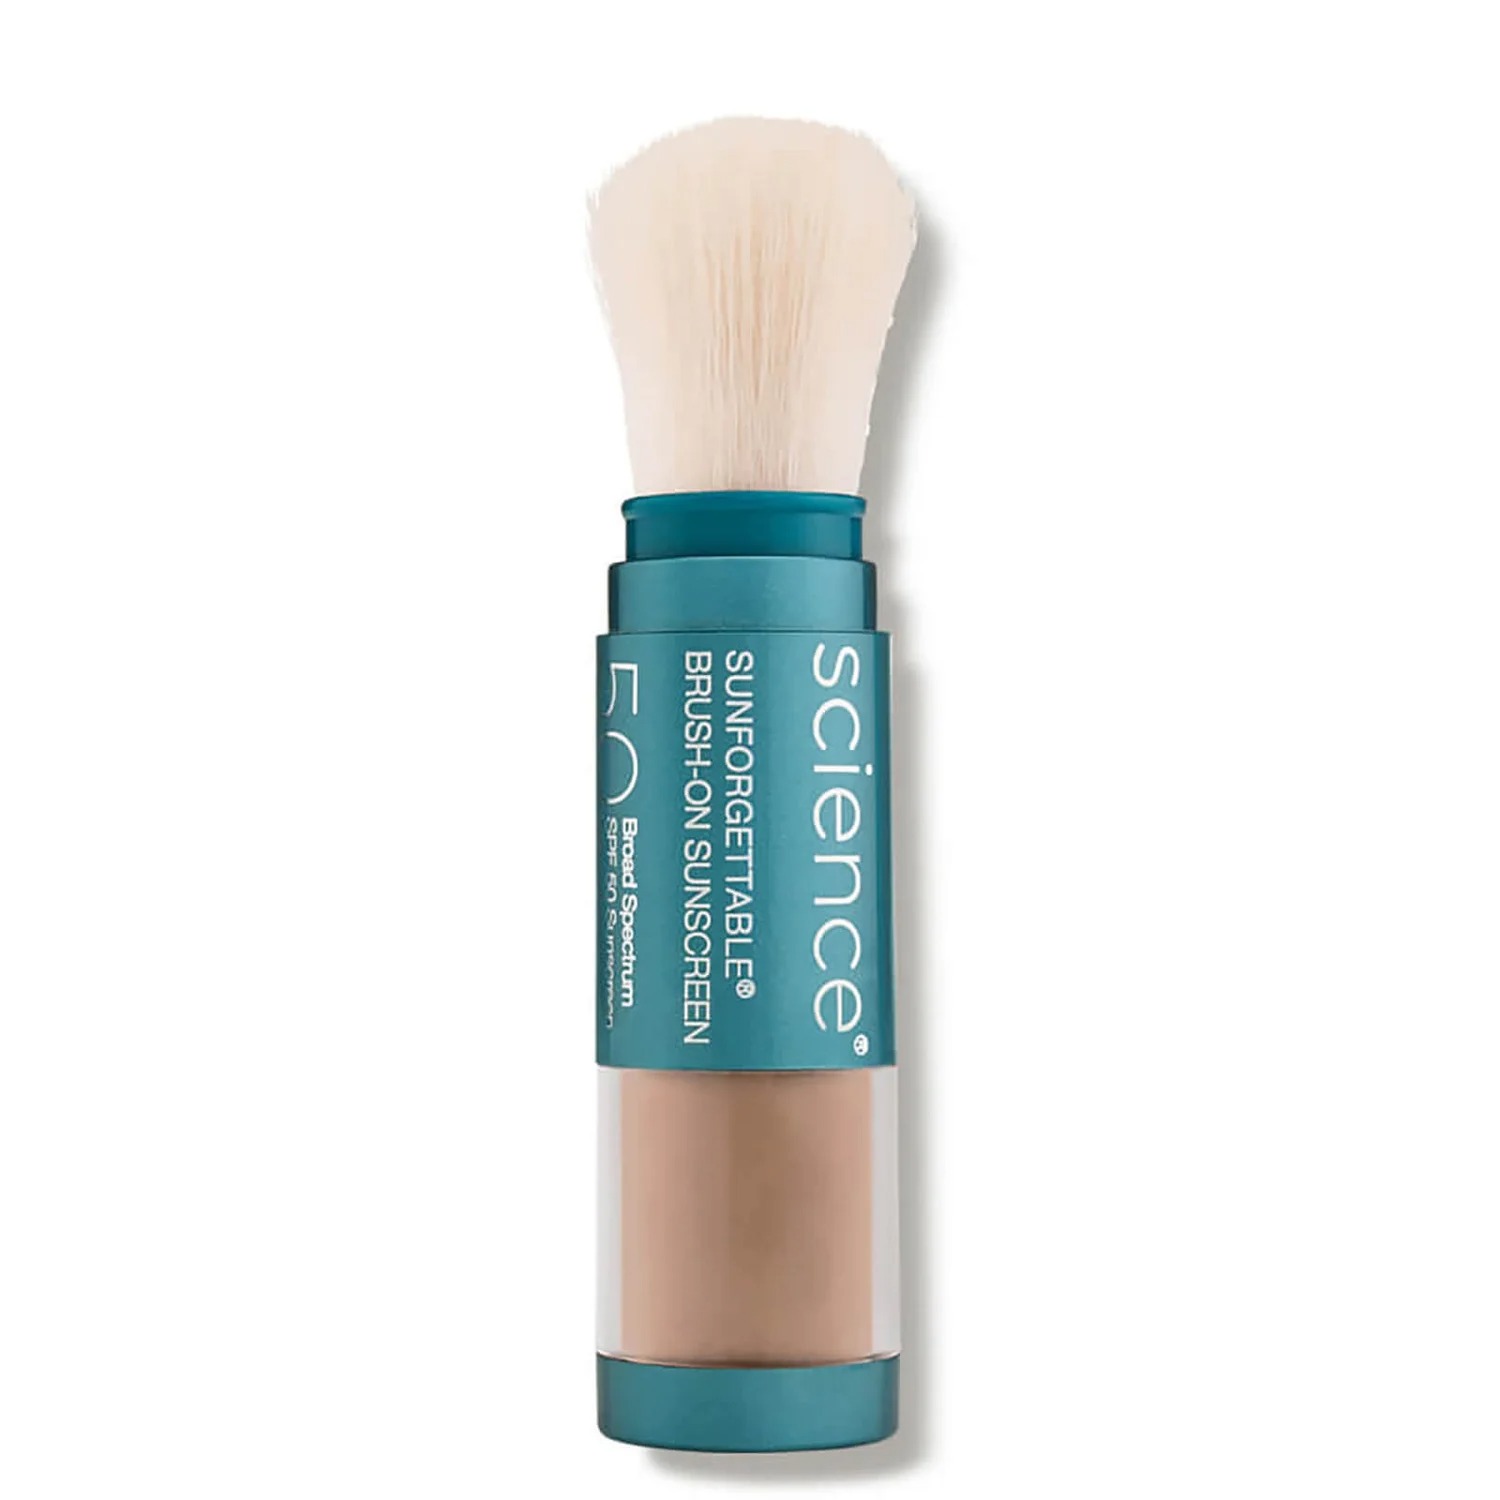 Colorscience Sunforgettable Total Protection Brush-On Shield SPF 50 